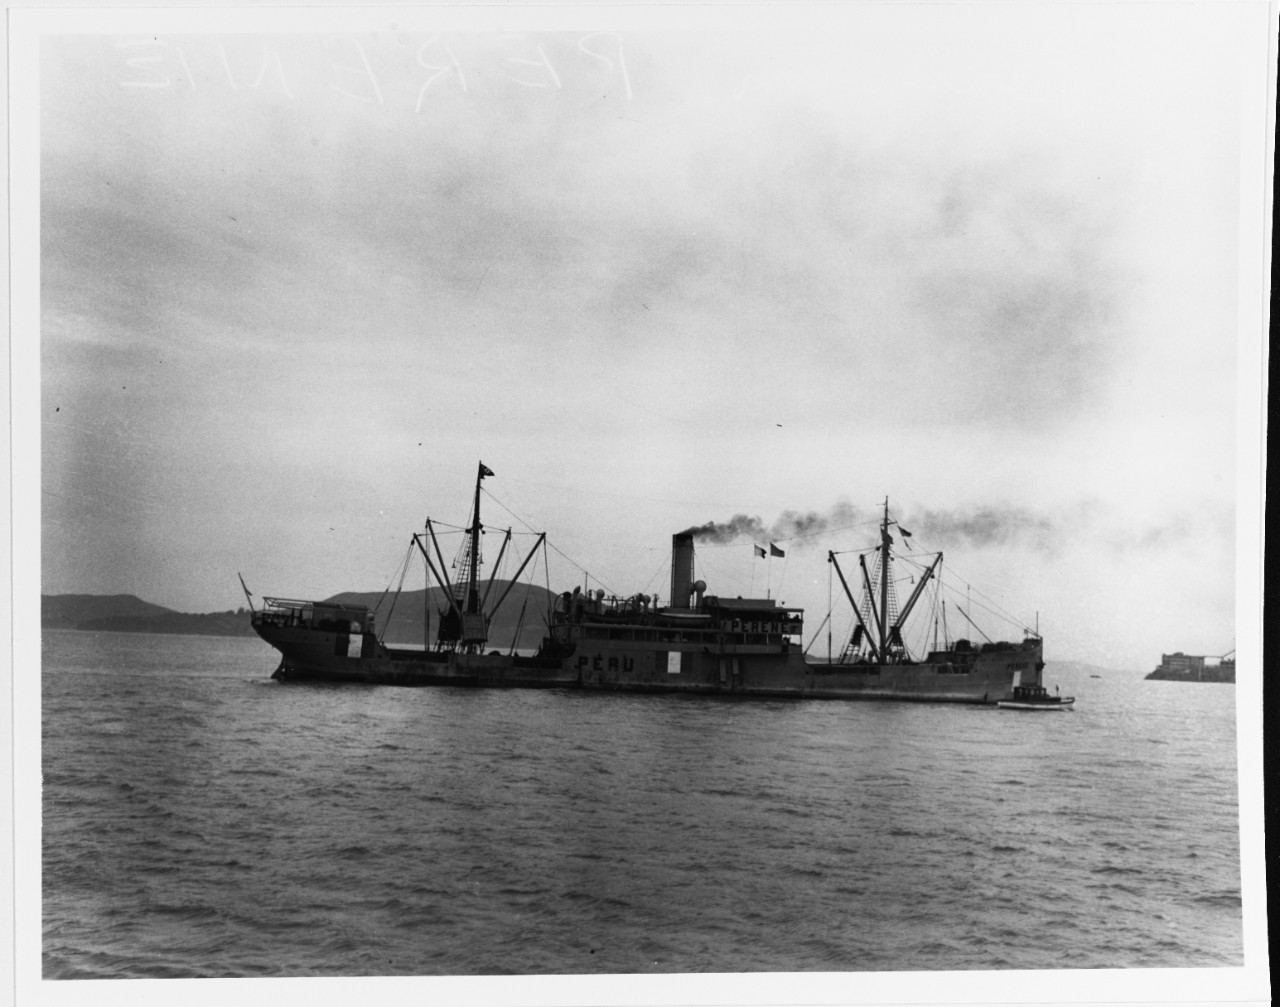 S.S. PERENE (Peruvian Merchant Freighter, 1905-1956; under this name 1920-1956)